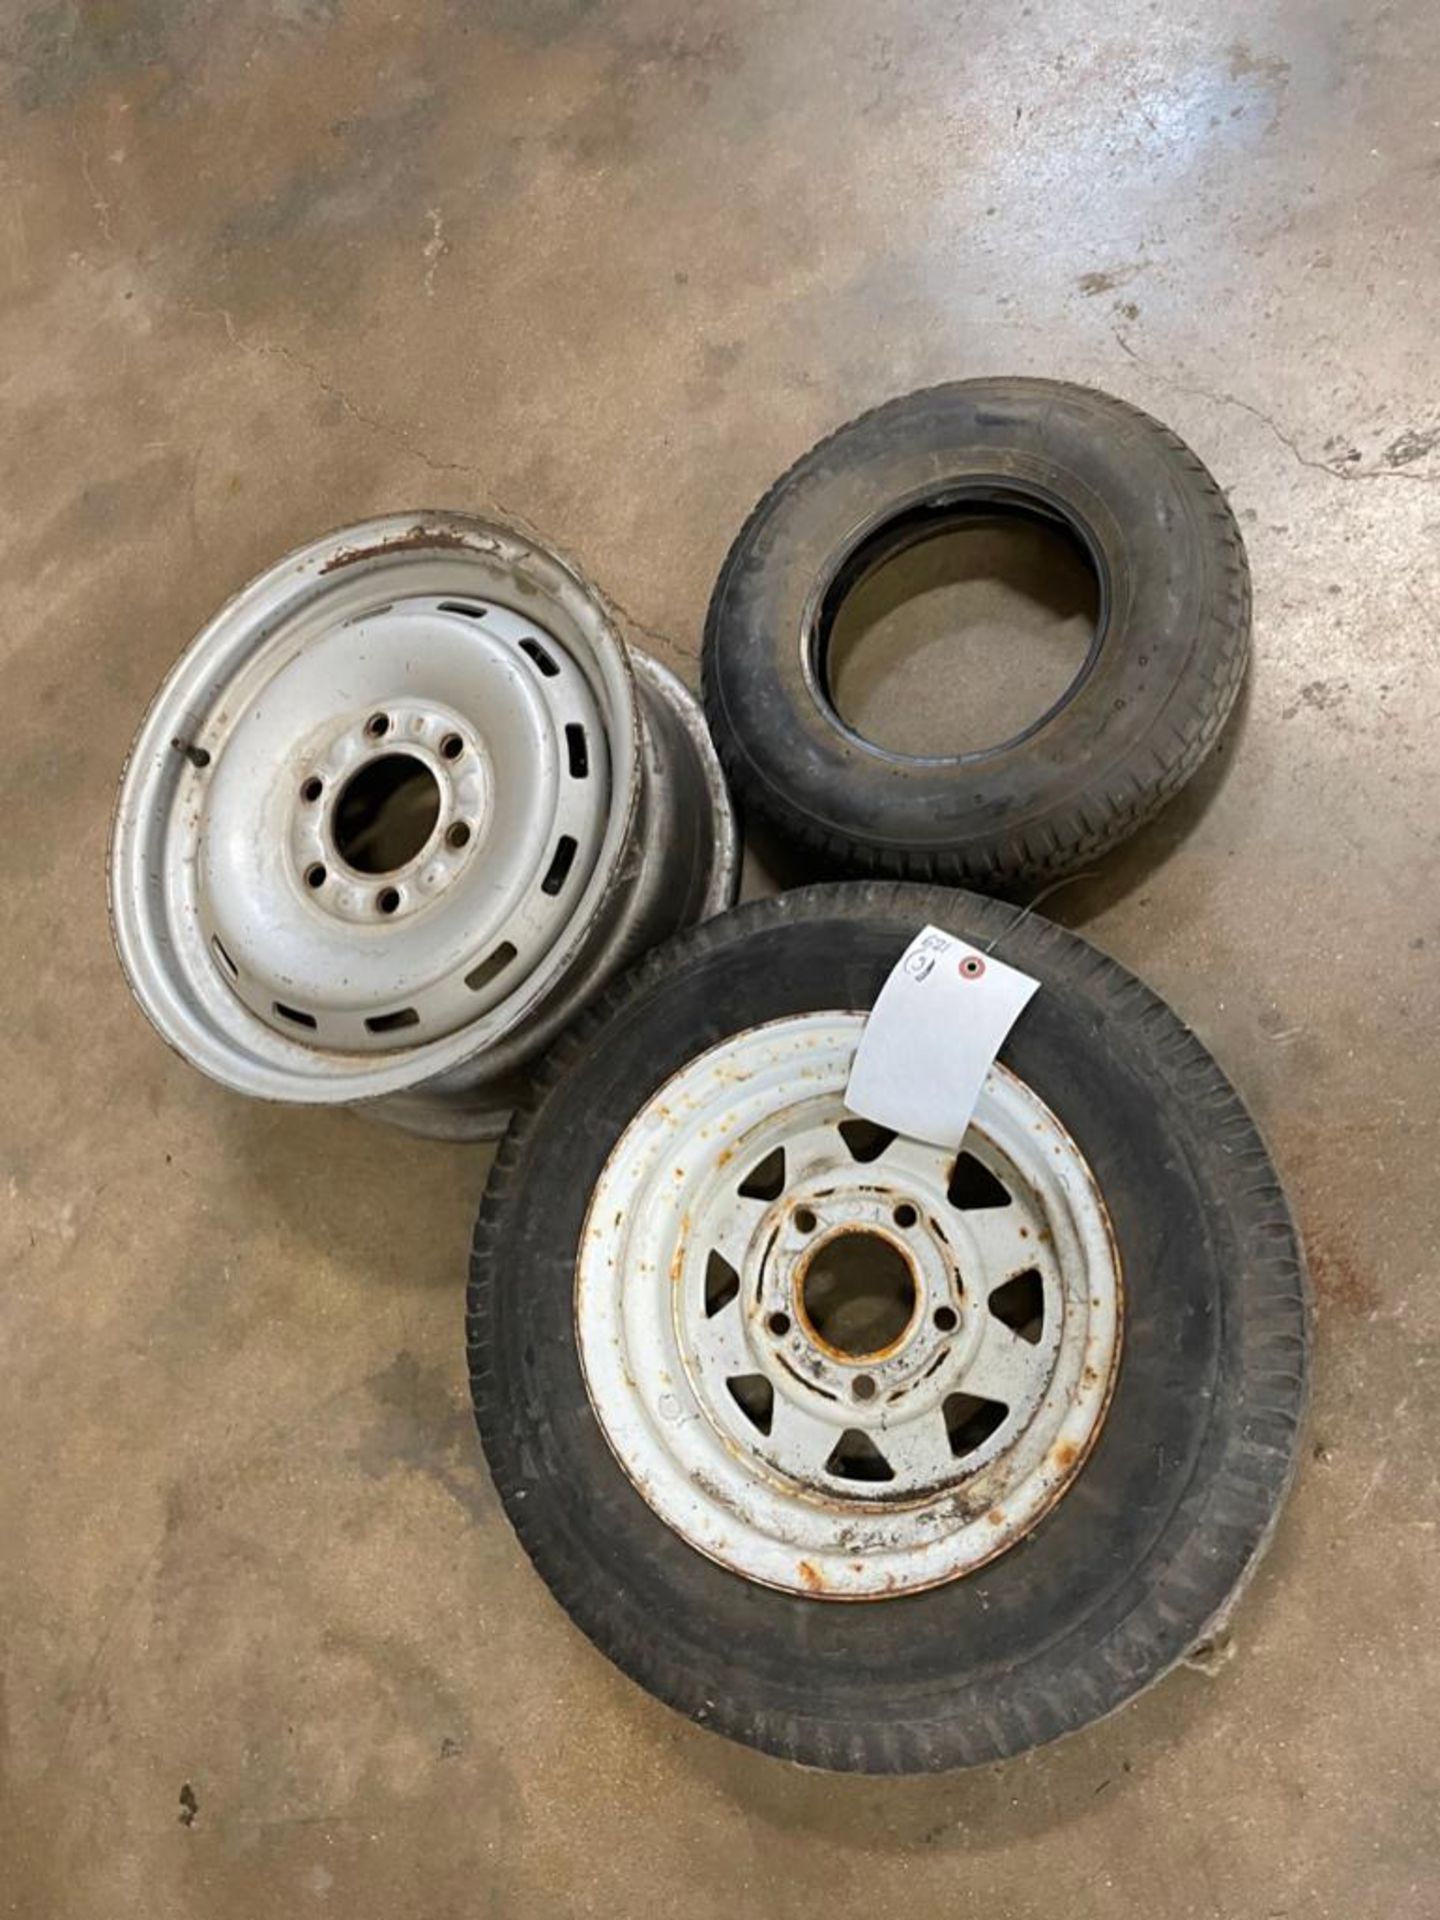 Tire 4.80/4.00-8, 6 Bolt Rim & Tire 5.30-12 with 5 Bolt Rim. Located in Hazelwood, MO